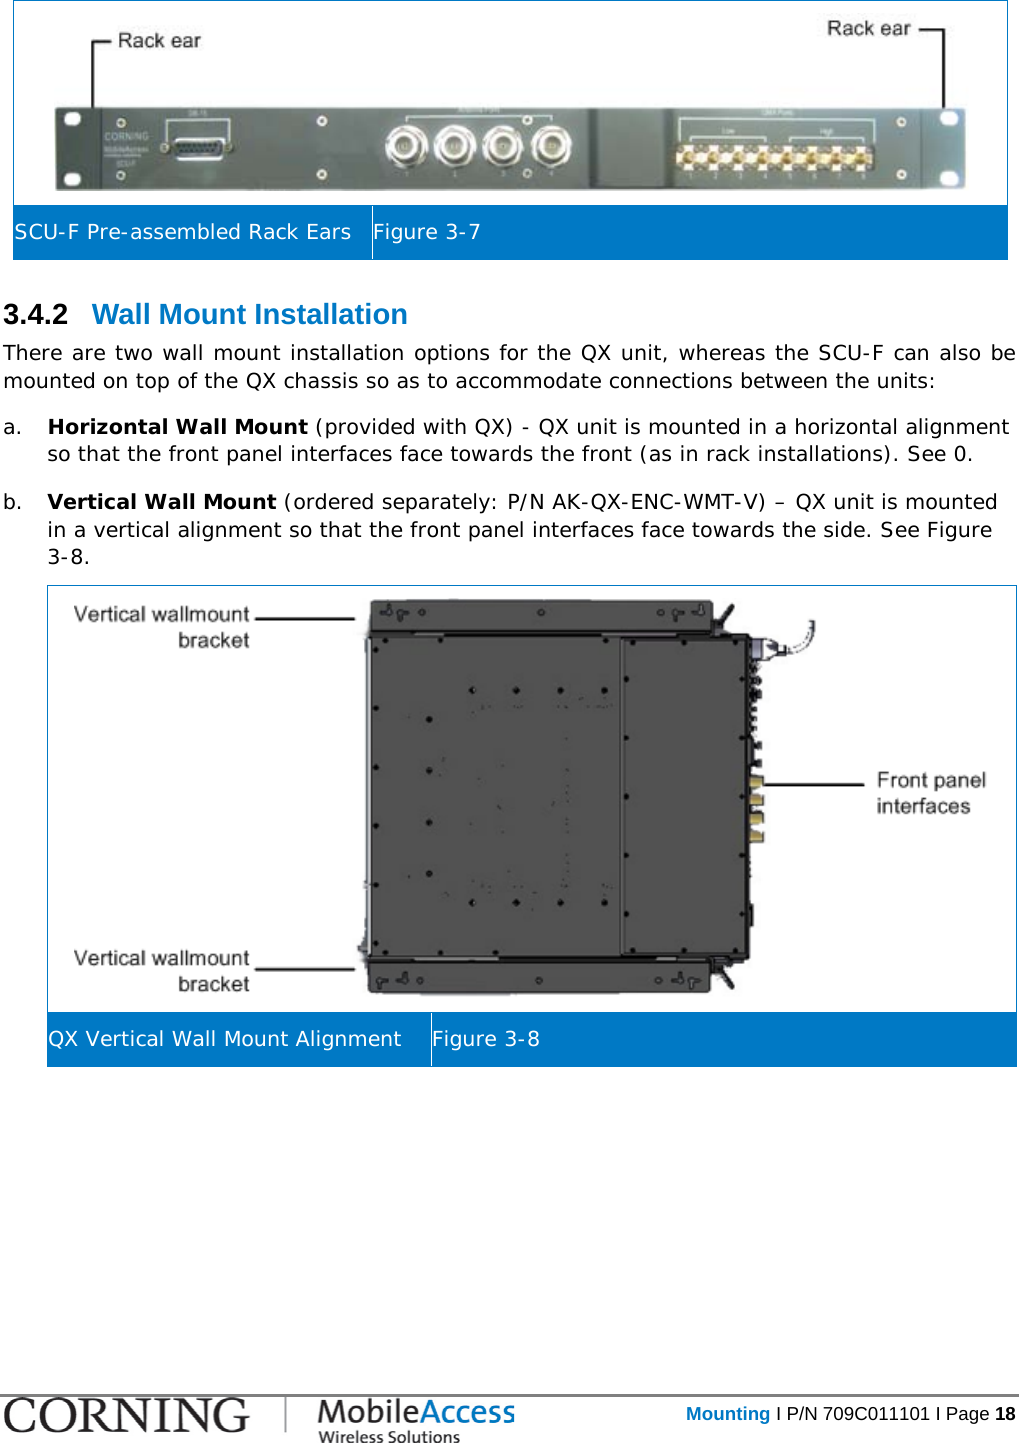   Mounting I P/N 709C011101 I Page 18   SCU-F Pre-assembled Rack Ears Figure  3-7 3.4.2  Wall Mount Installation There are two wall mount installation options for the QX unit, whereas the SCU-F can also be mounted on top of the QX chassis so as to accommodate connections between the units: a. Horizontal Wall Mount (provided with QX) - QX unit is mounted in a horizontal alignment so that the front panel interfaces face towards the front (as in rack installations). See  0. b. Vertical Wall Mount (ordered separately: P/N AK-QX-ENC-WMT-V) – QX unit is mounted in a vertical alignment so that the front panel interfaces face towards the side. See Figure  3-8.  QX Vertical Wall Mount Alignment Figure  3-8    